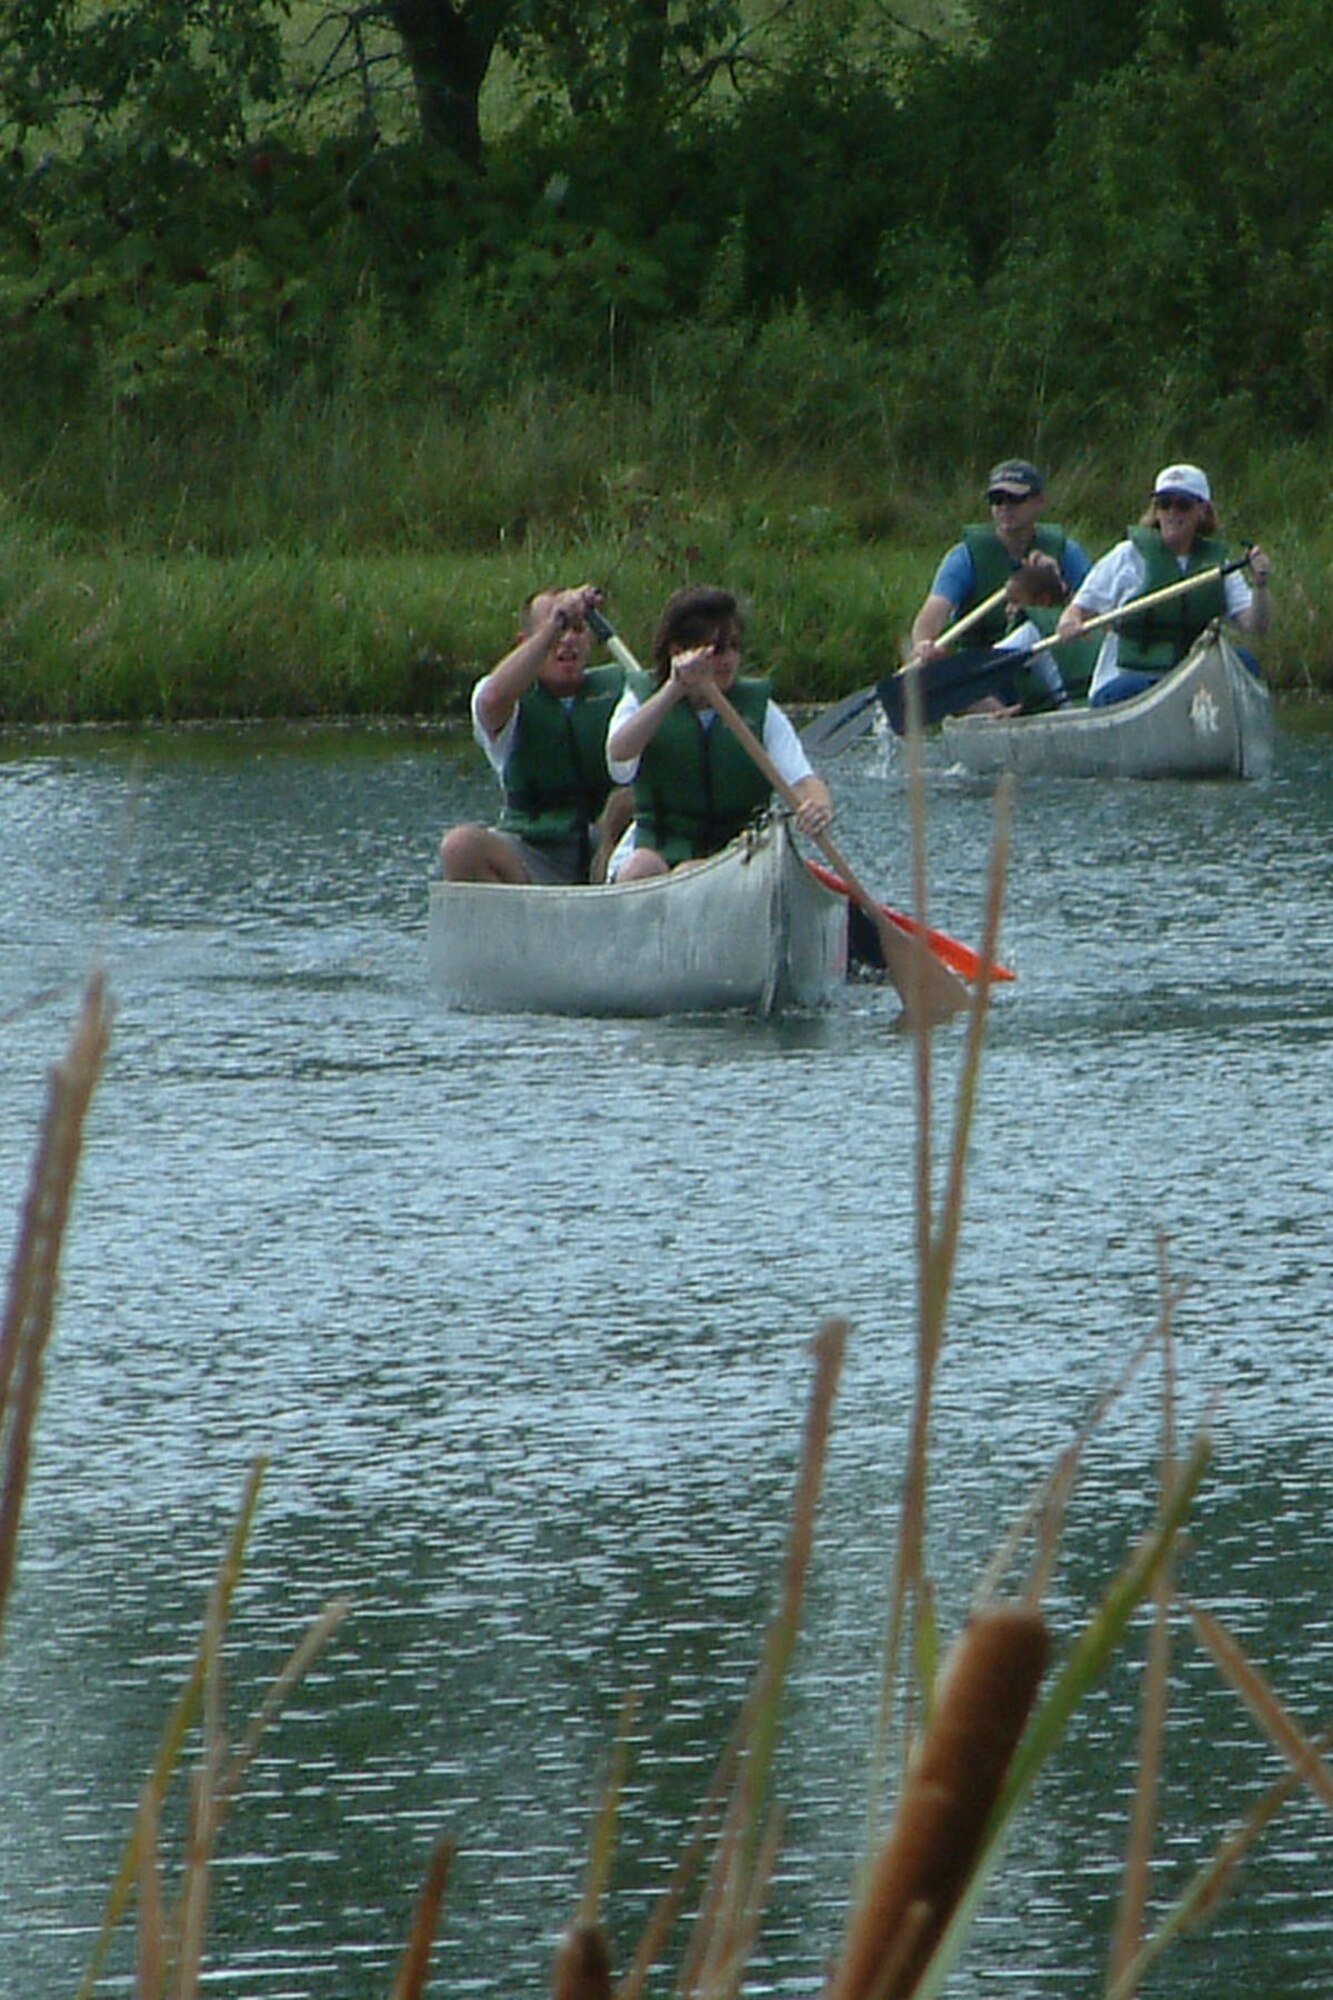 MCCONNELL AIR FORCE BASE, Kan. – A participant in the 22nd Maintenance Group reunion and reintegration retreat tries canoeing in the lake at the Rock Springs 4-H Center, near Junction City, Kan., Aug. 25. Archery, horseback riding, trap and rifle shooting were among some of the activities retreat members could choose from. More than 70 military members, some recently returned from deployment, and their families participated in the event. (U.S. Air Force photo by Tech. Sgt. Chyrece Campbell